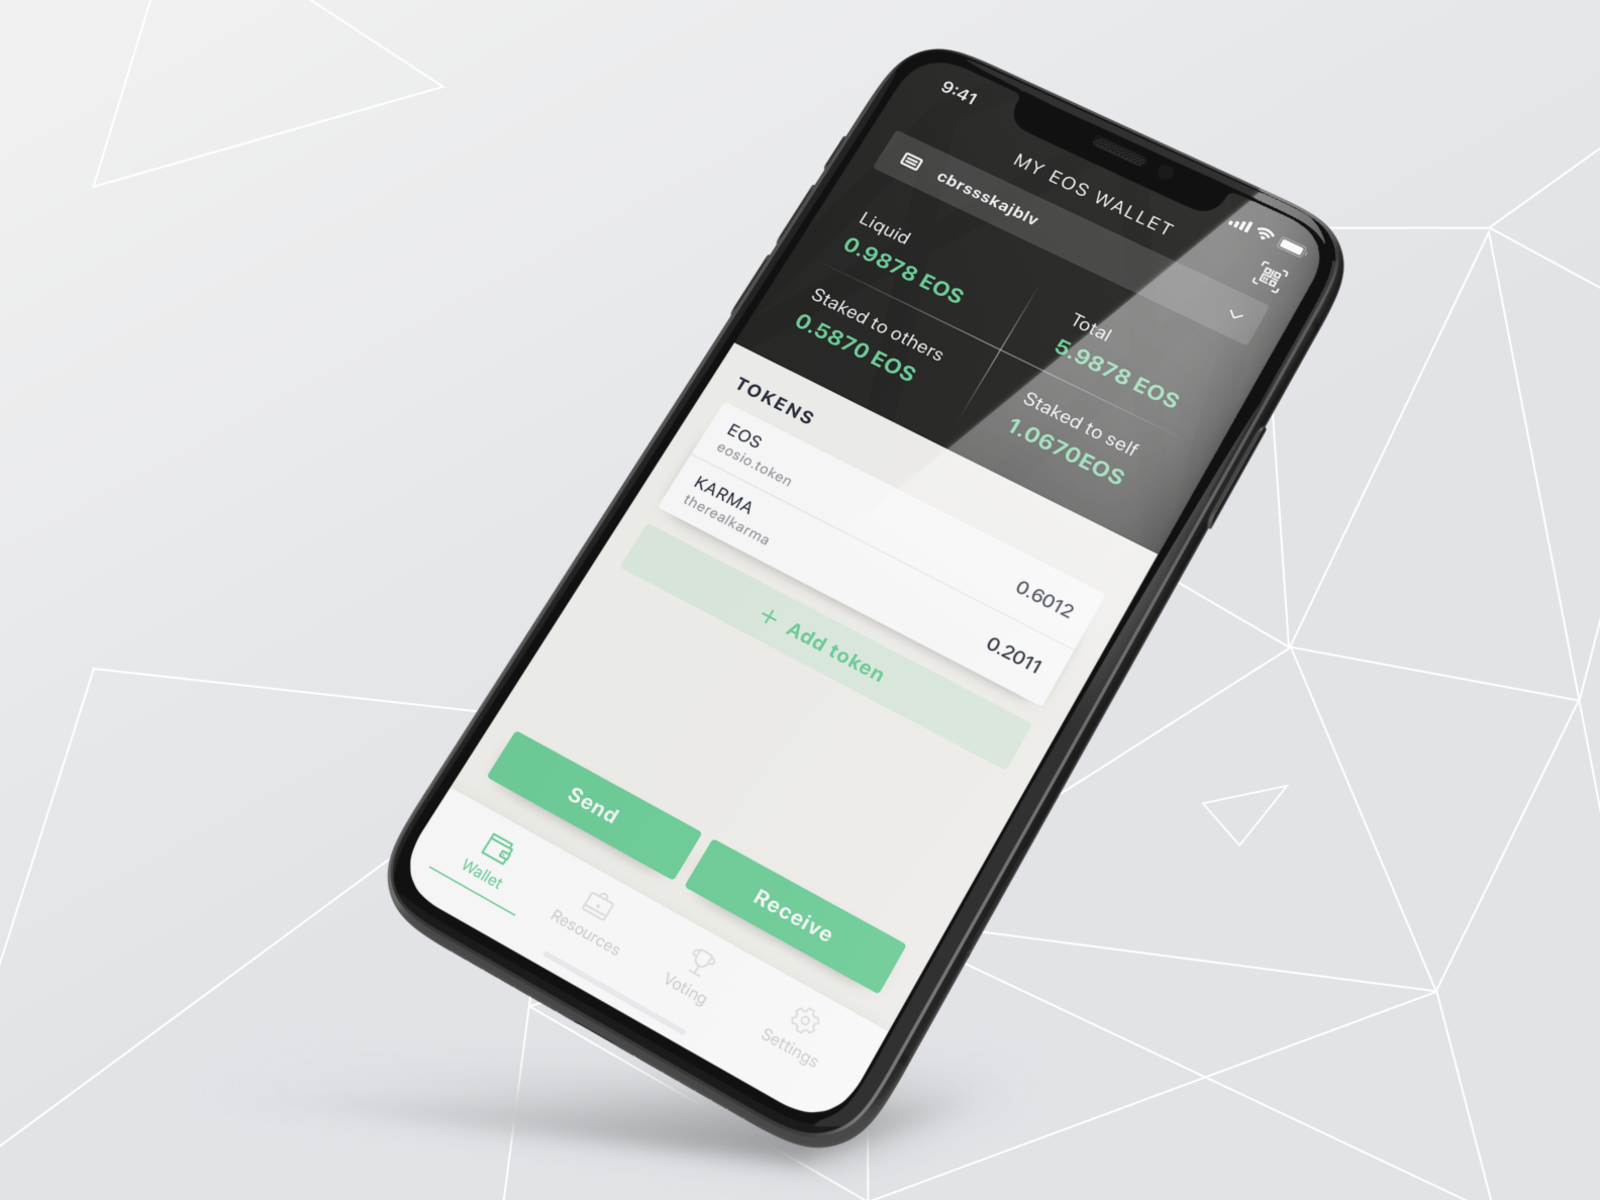 My EOS Wallet - Main Screen by Kate Orel for NoisyMiner on Dribbble